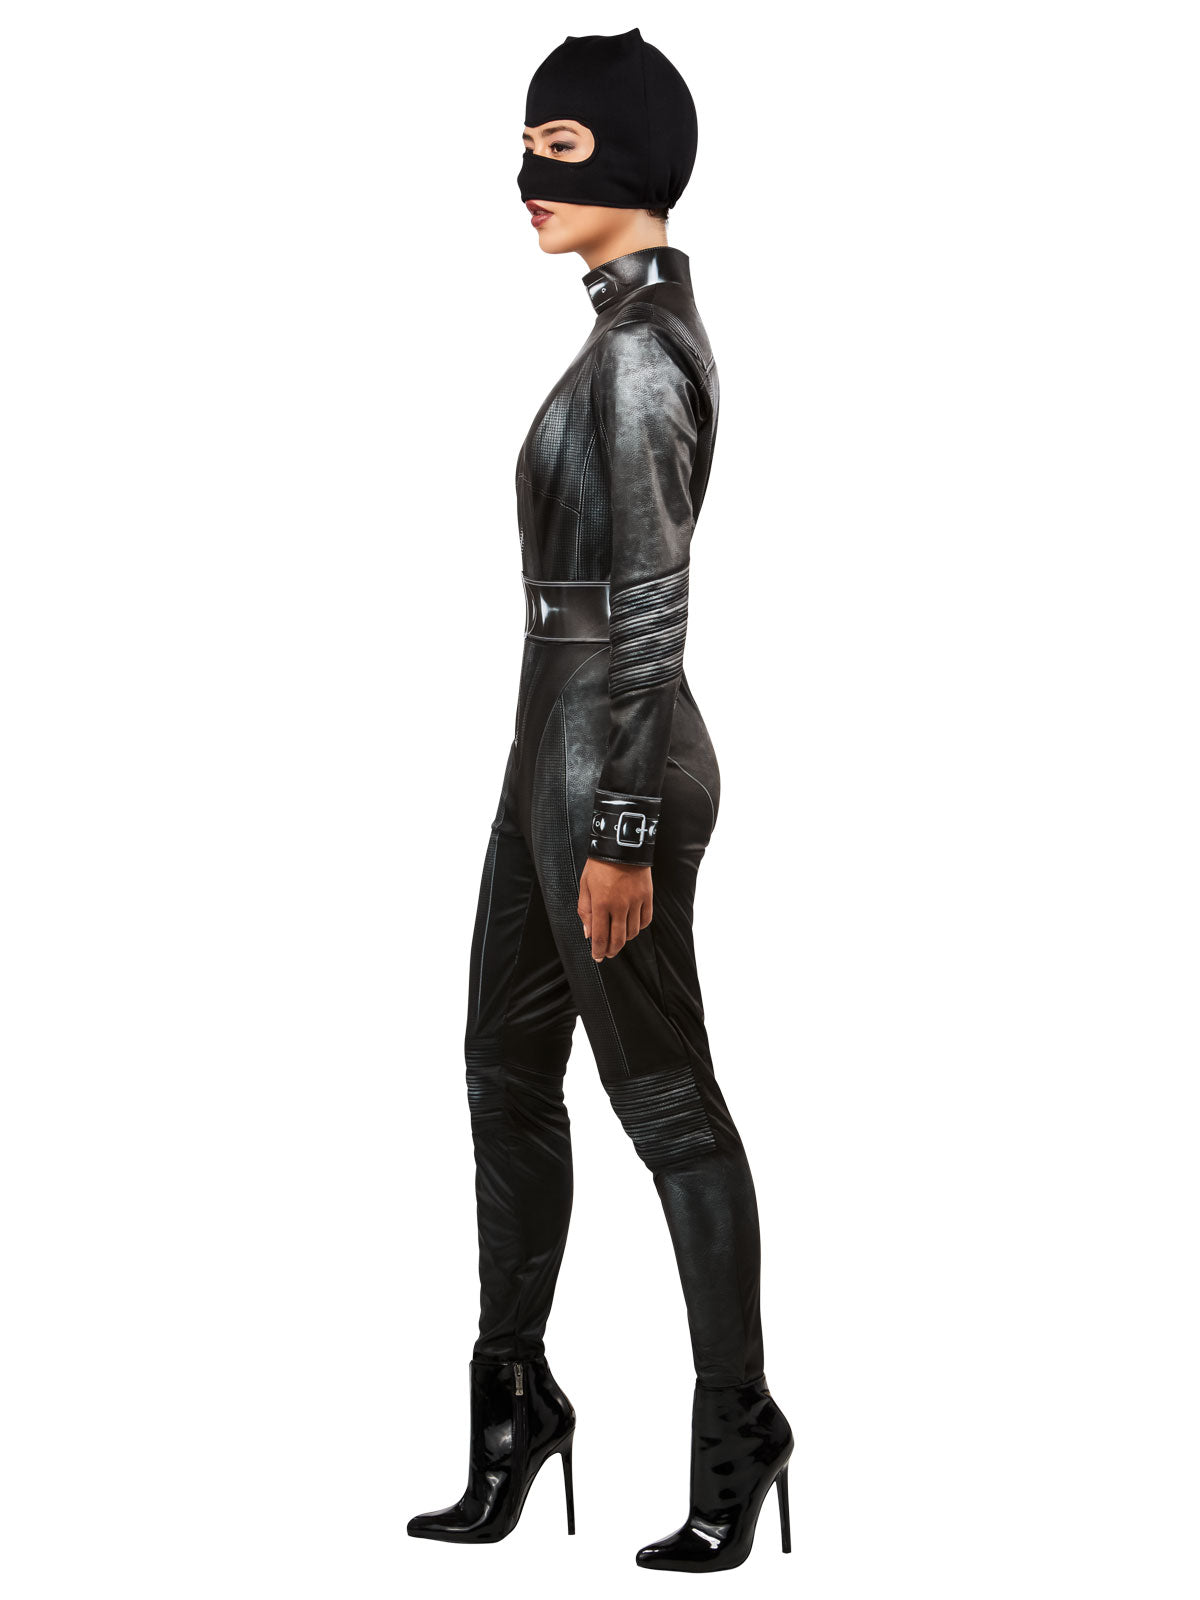 Rubies Selina Kyle (Catwoman) Deluxe Adult Costume (Size L)